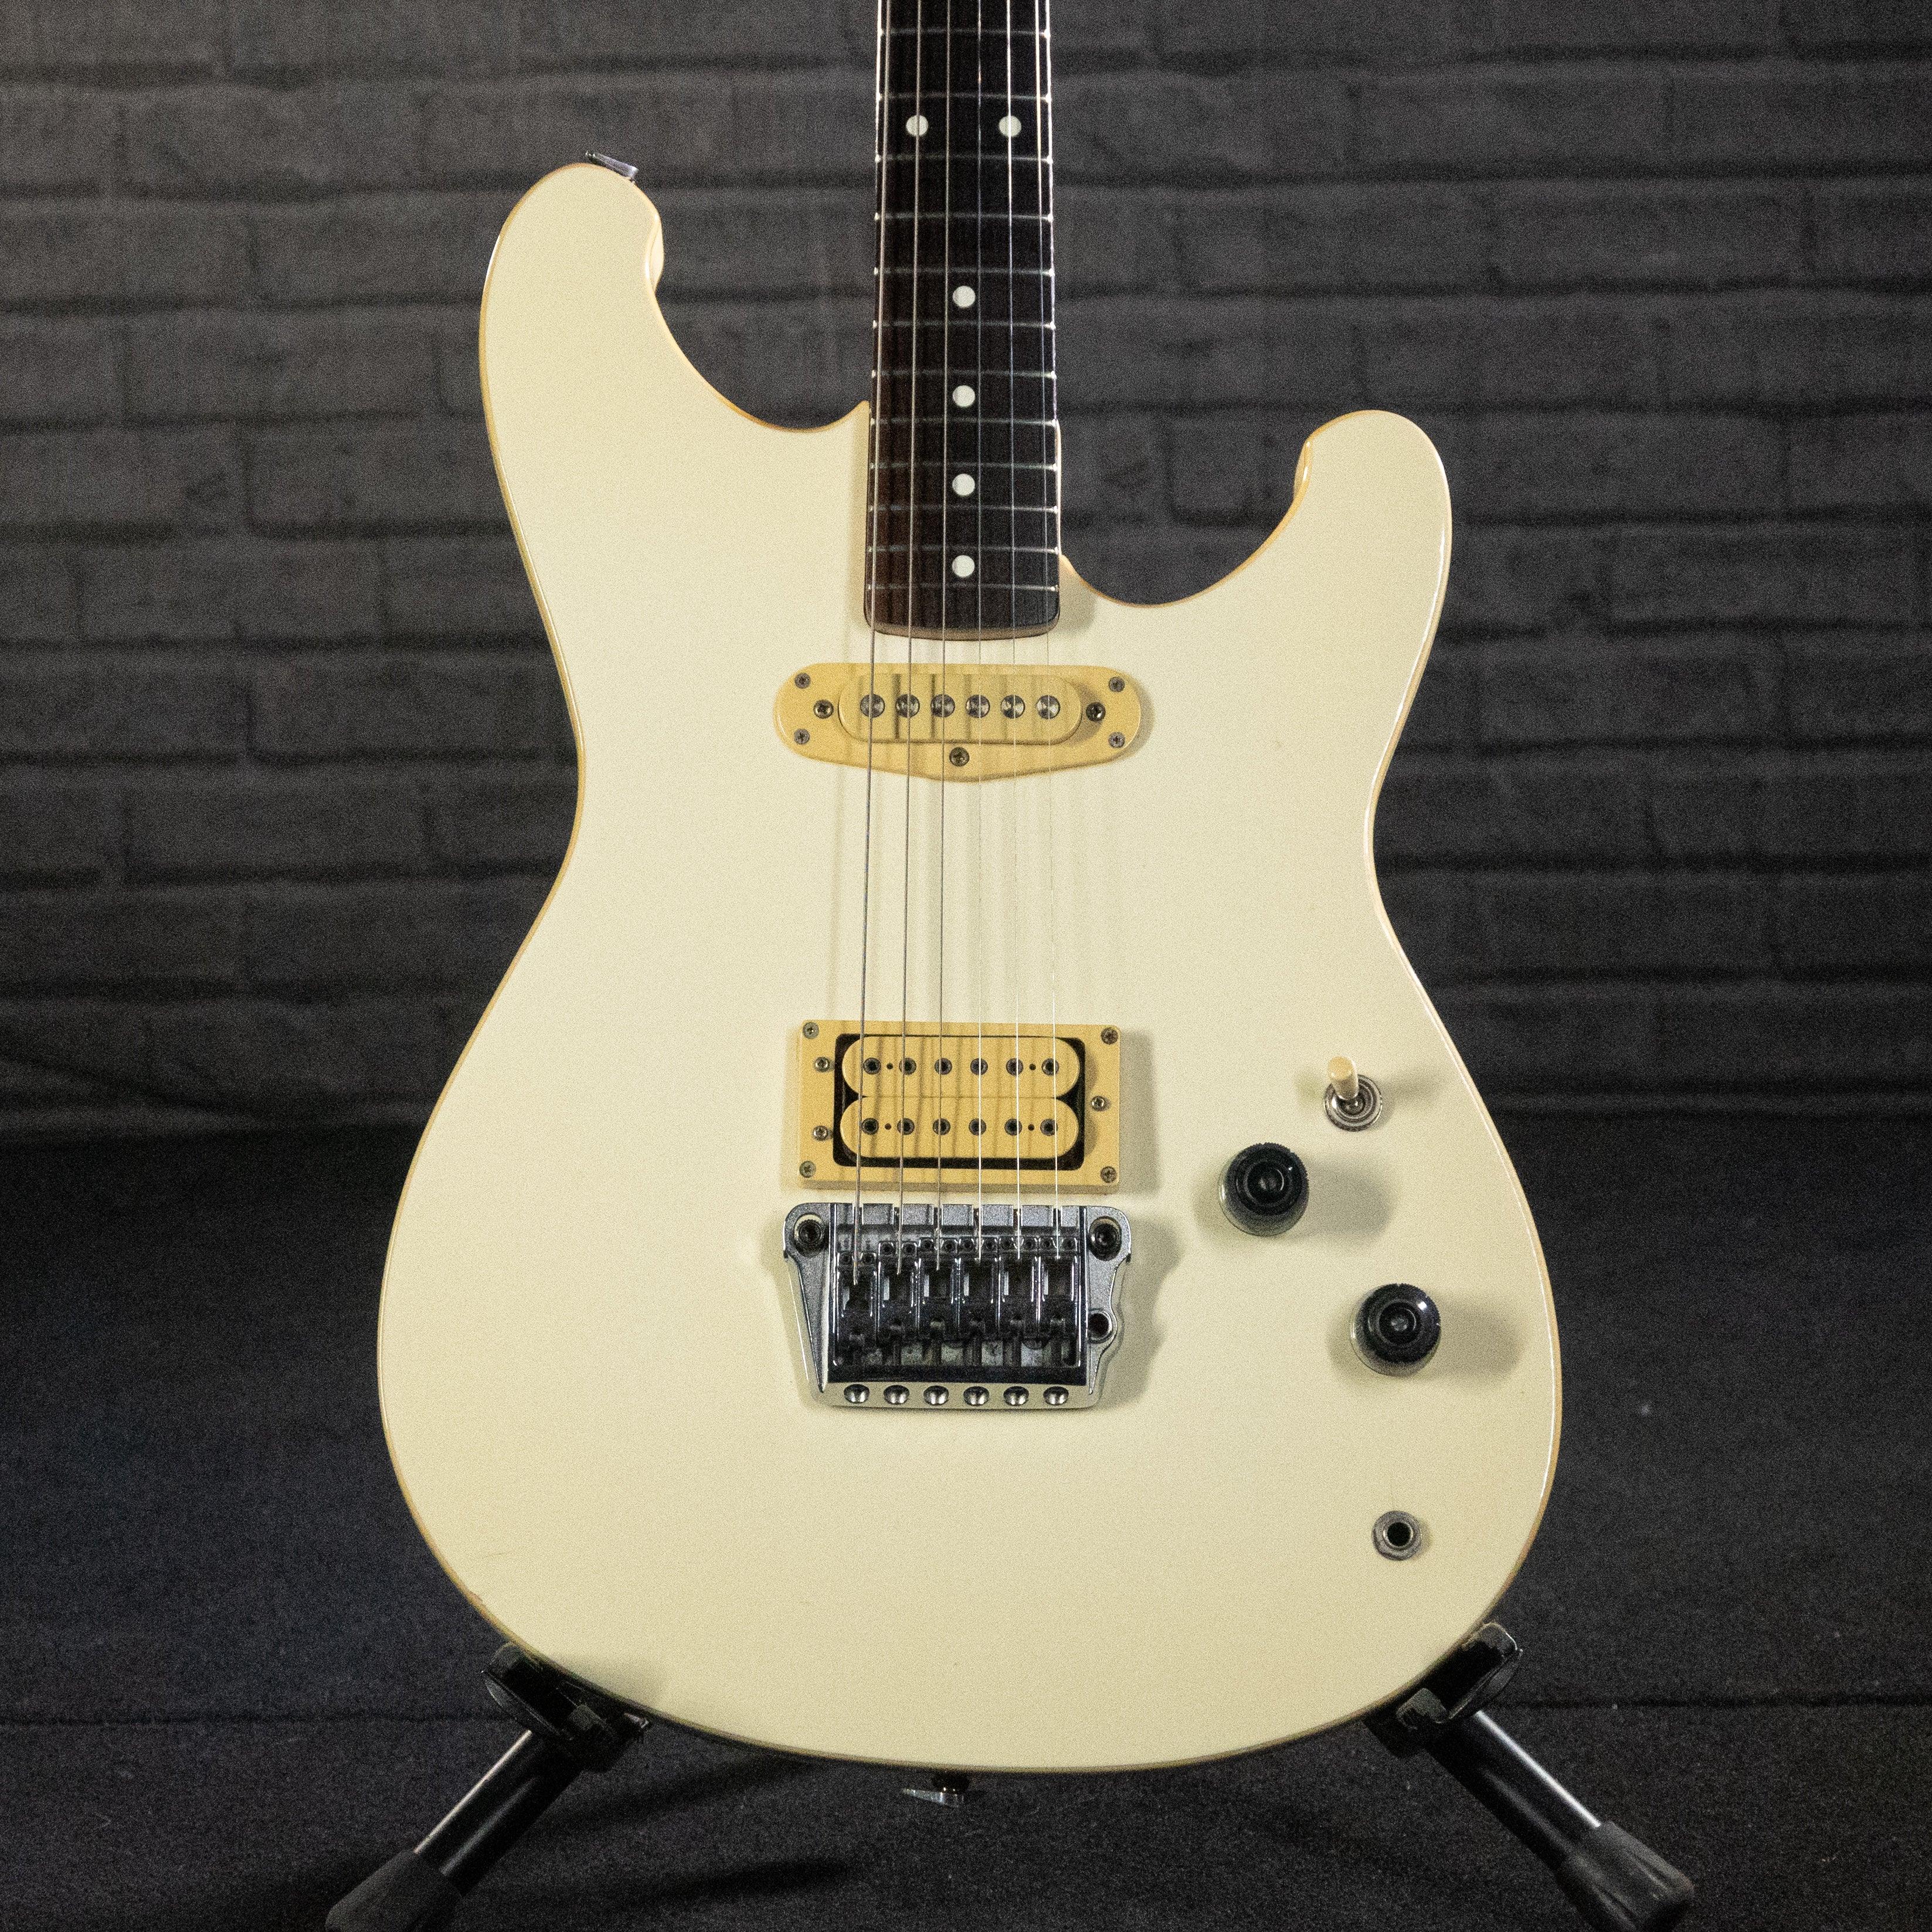 Ibanez Roadstar II RS335 1980s Vintage Electric Guitar(White) USED - Impulse Music Co.